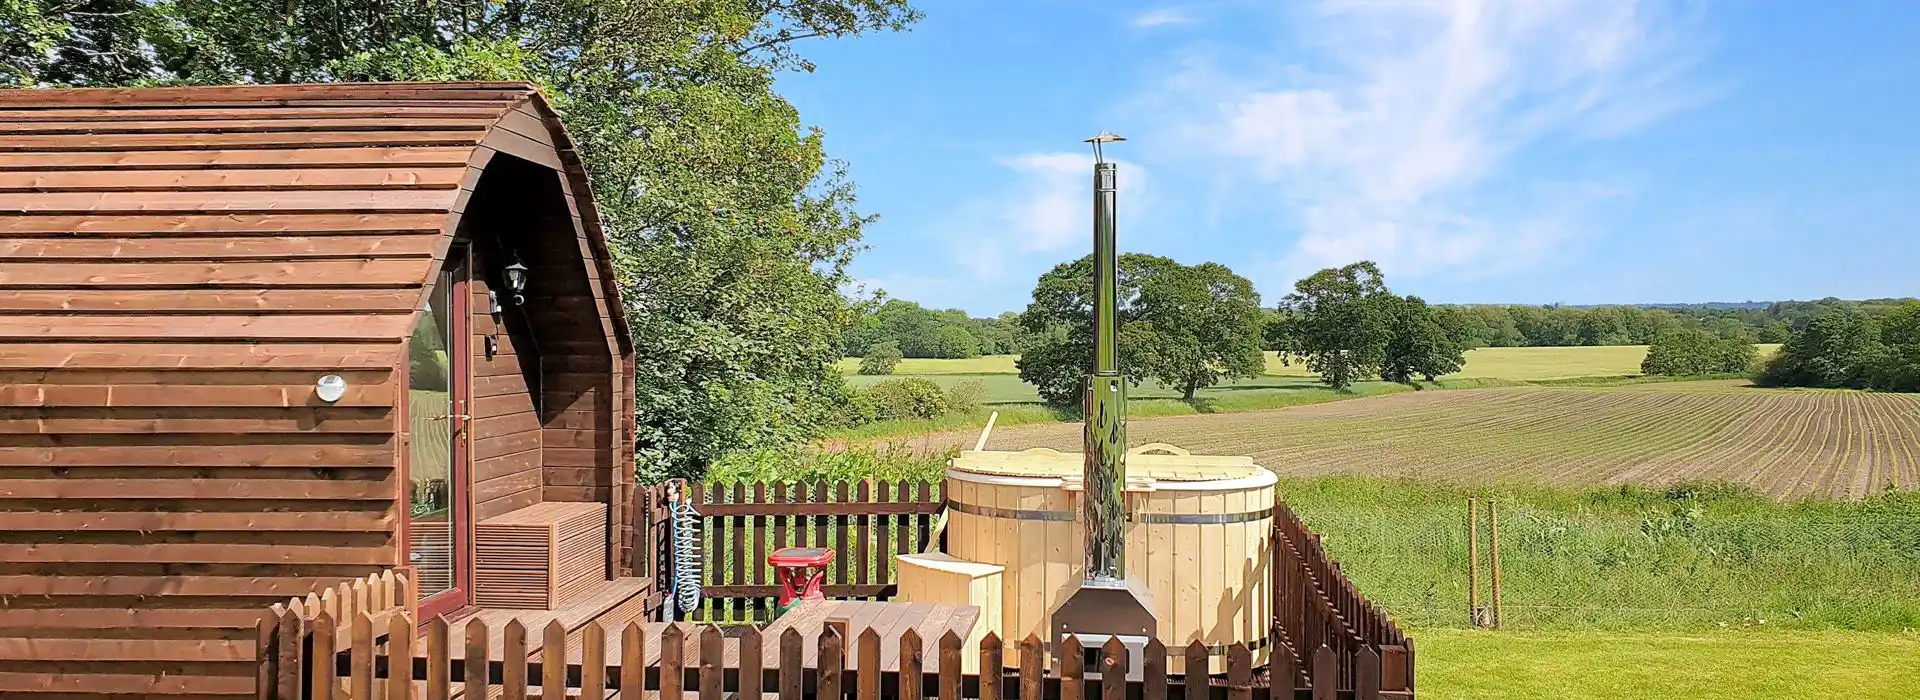 Stoke-on-Trent camping and glamping pods